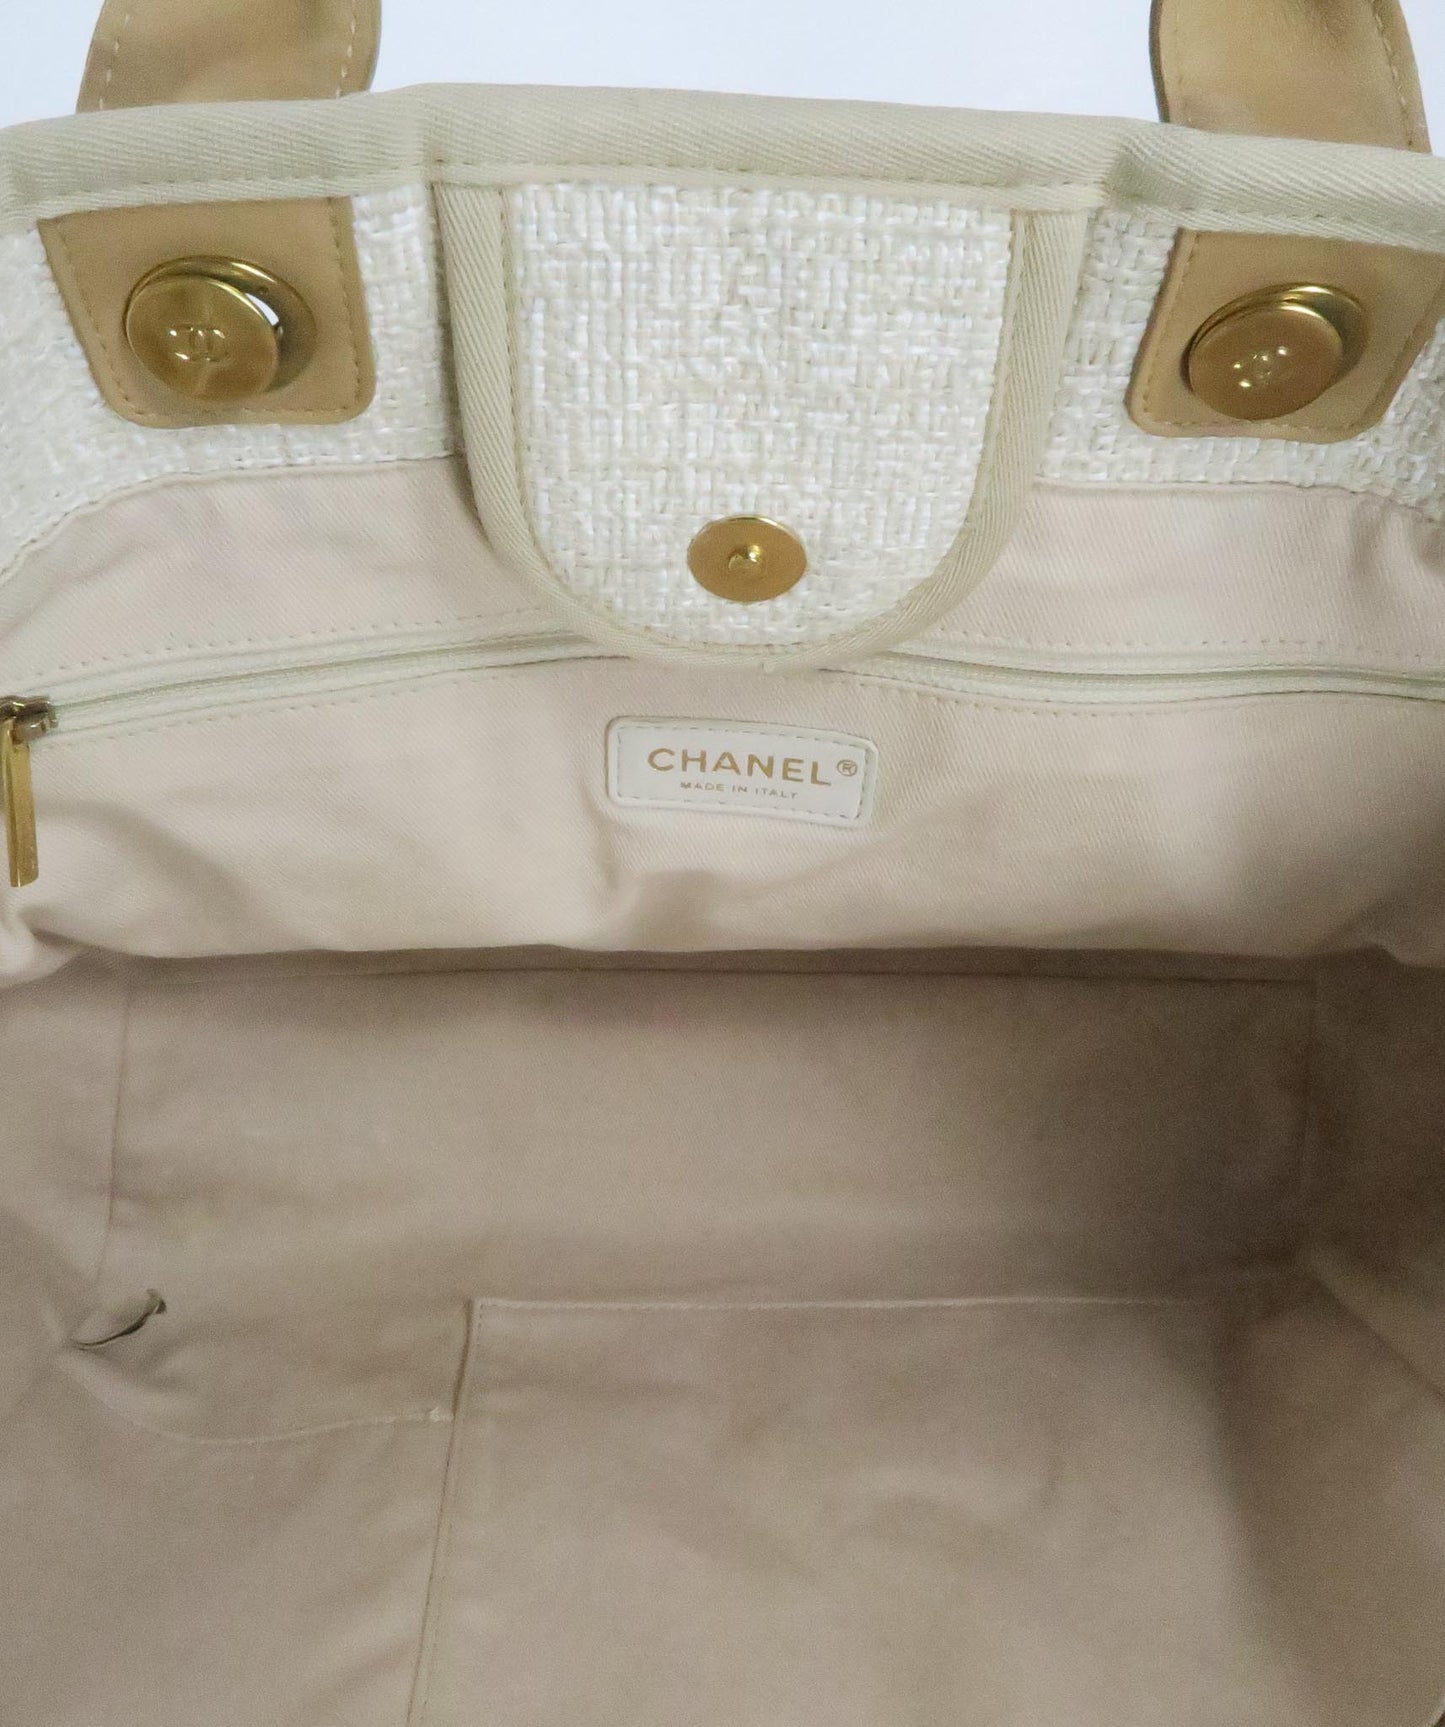 Chanel Cream Ivory Large Tweed Deauville Tote Bag